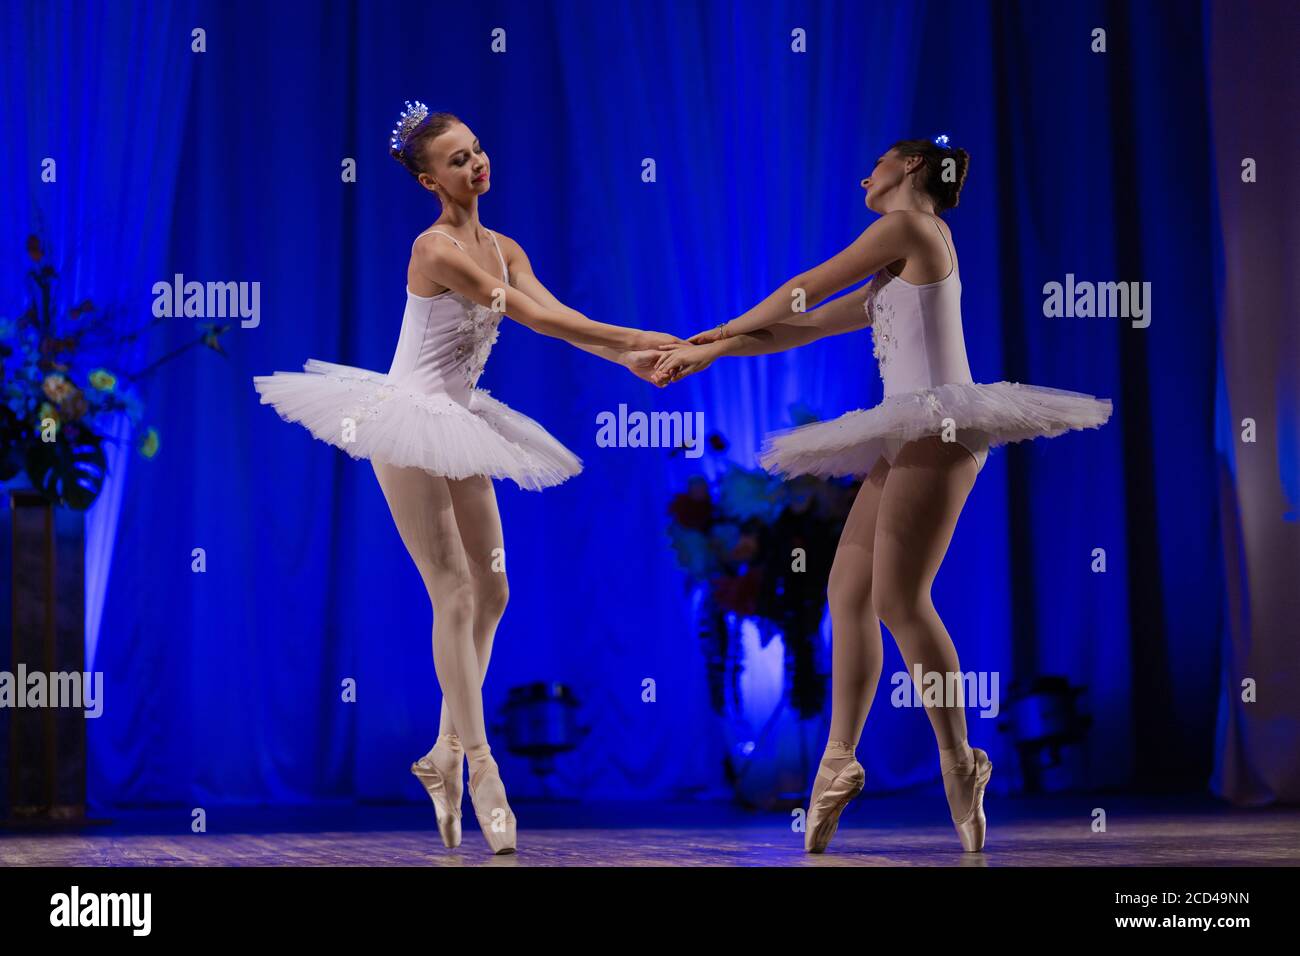 Young woman ballerina in a white tutu dancing performance on stage in a  theater on a blue background Stock Photo - Alamy